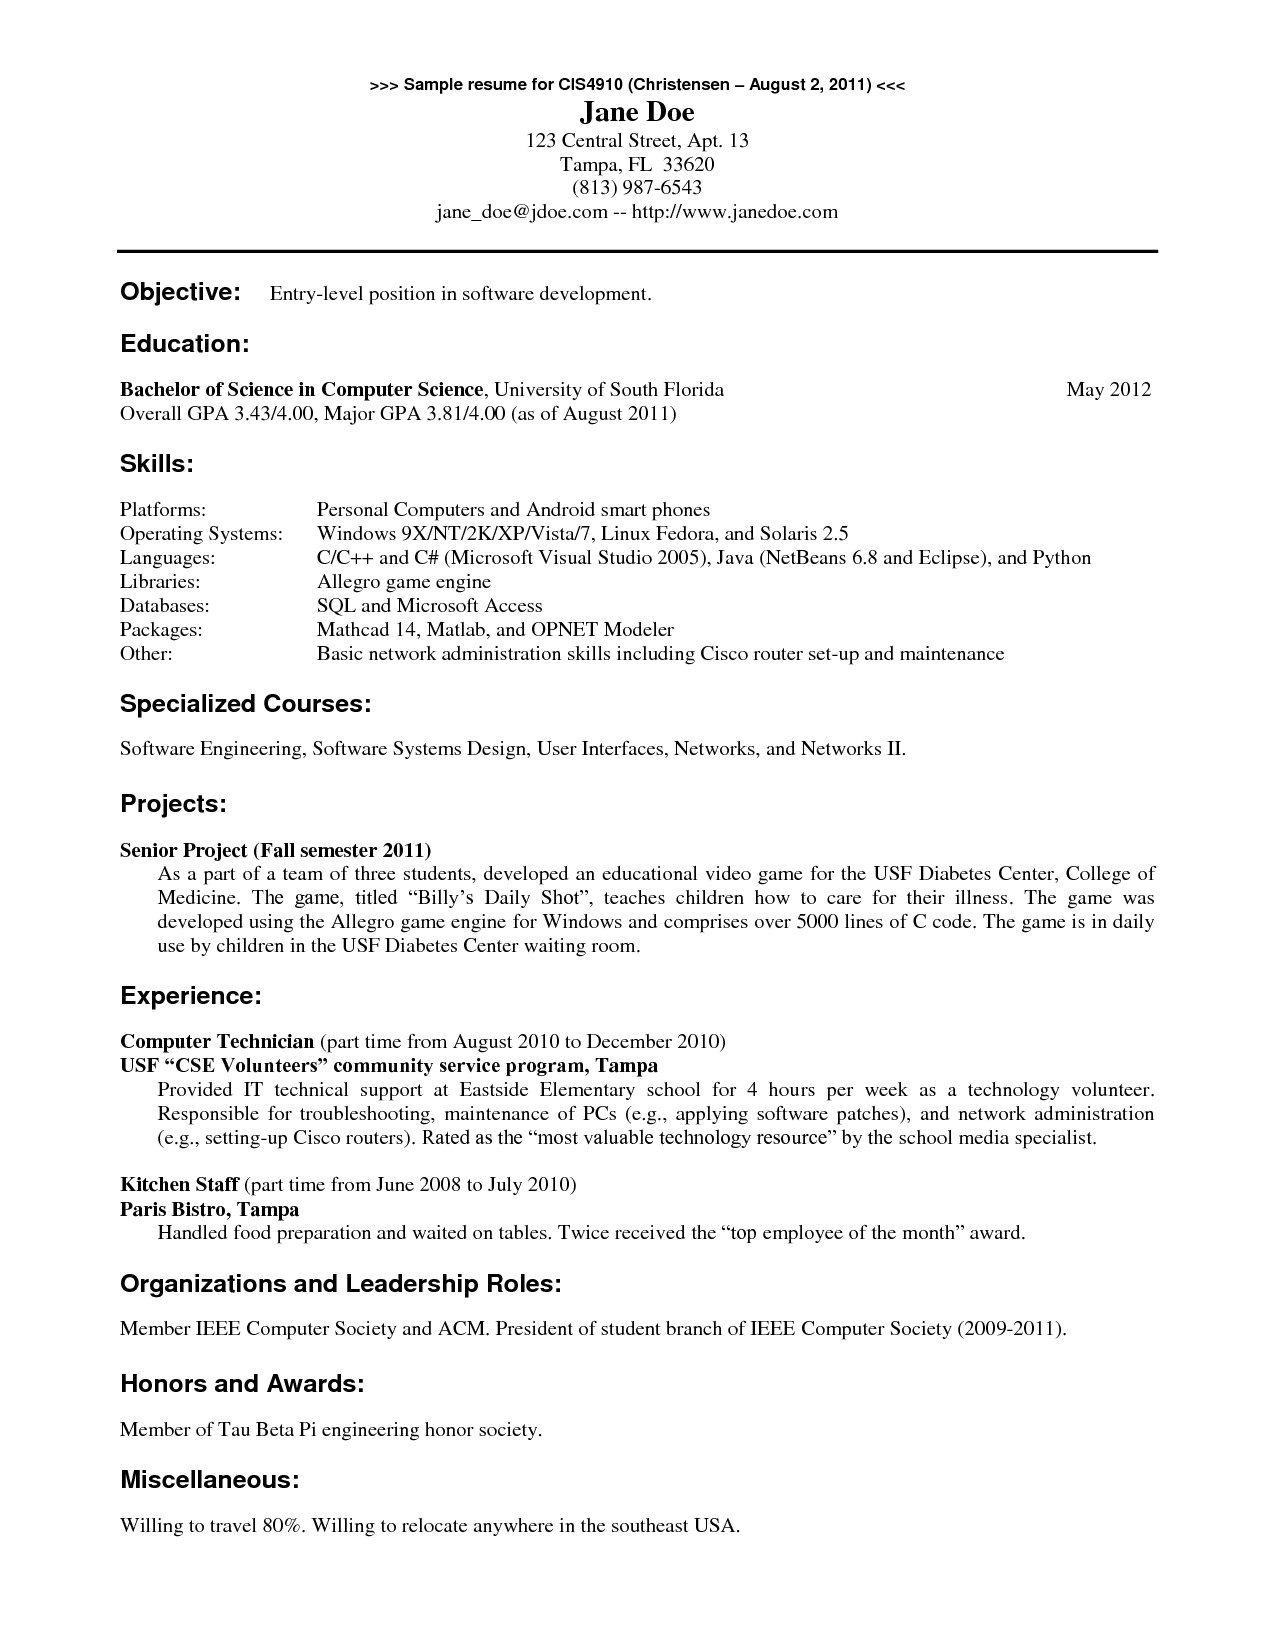 sample-resume-for-experienced-assistant-professor-in-computer-science